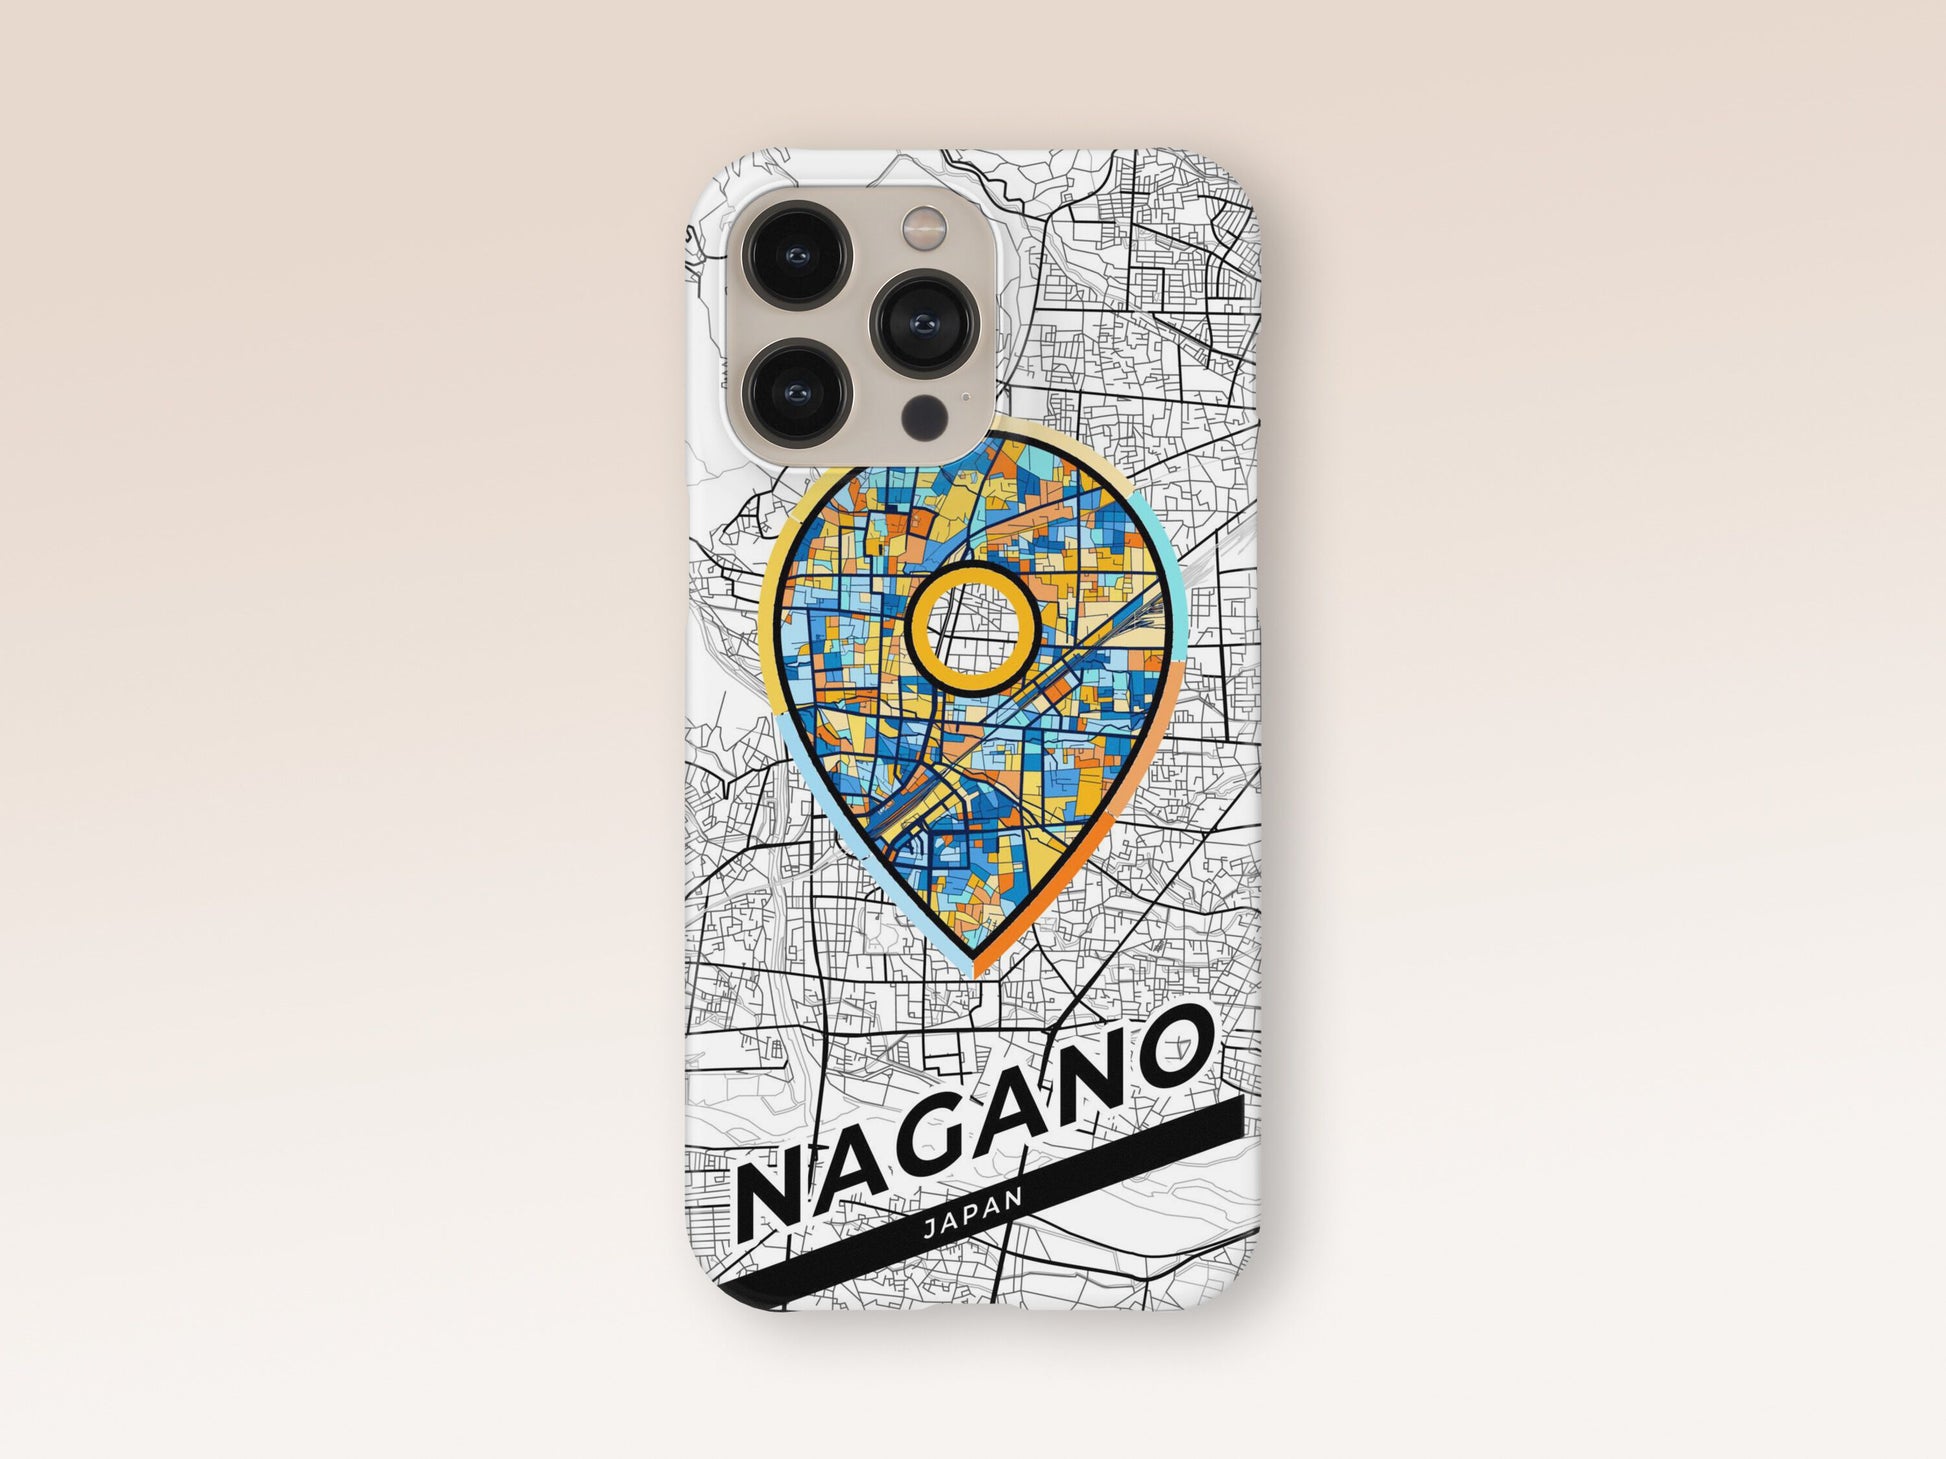 Nagano Japan slim phone case with colorful icon 1